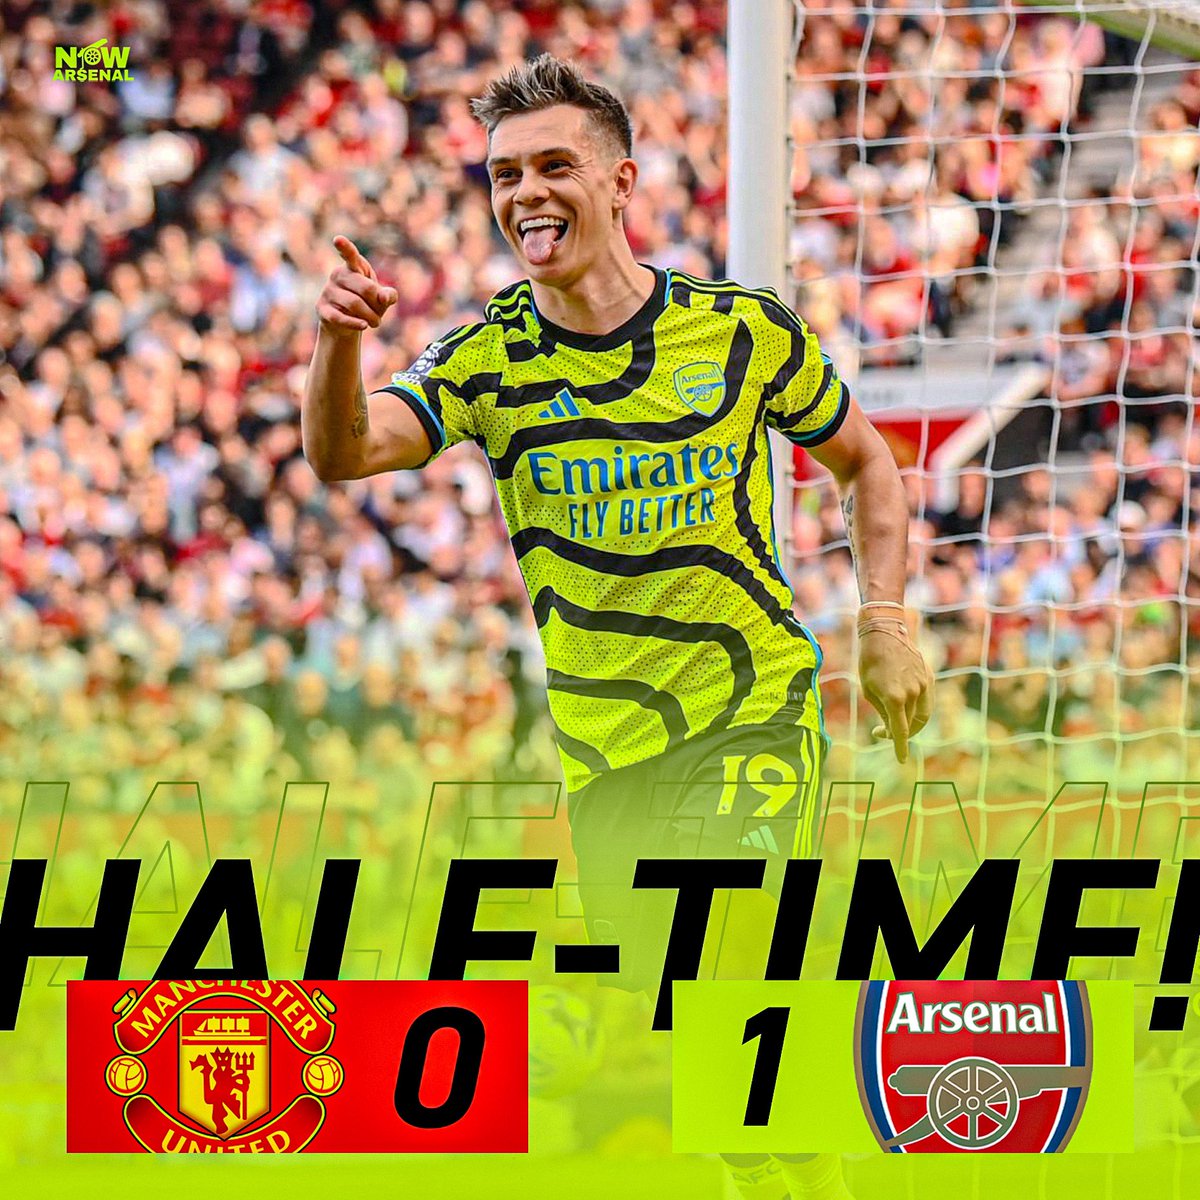 HT: Manchester United 0-1 Arsenal We might be winning, but we’re making them look so much better than they are. It’s Old Trafford so I understand, but we need more control in the second-half. Thoughts at the break? #afc